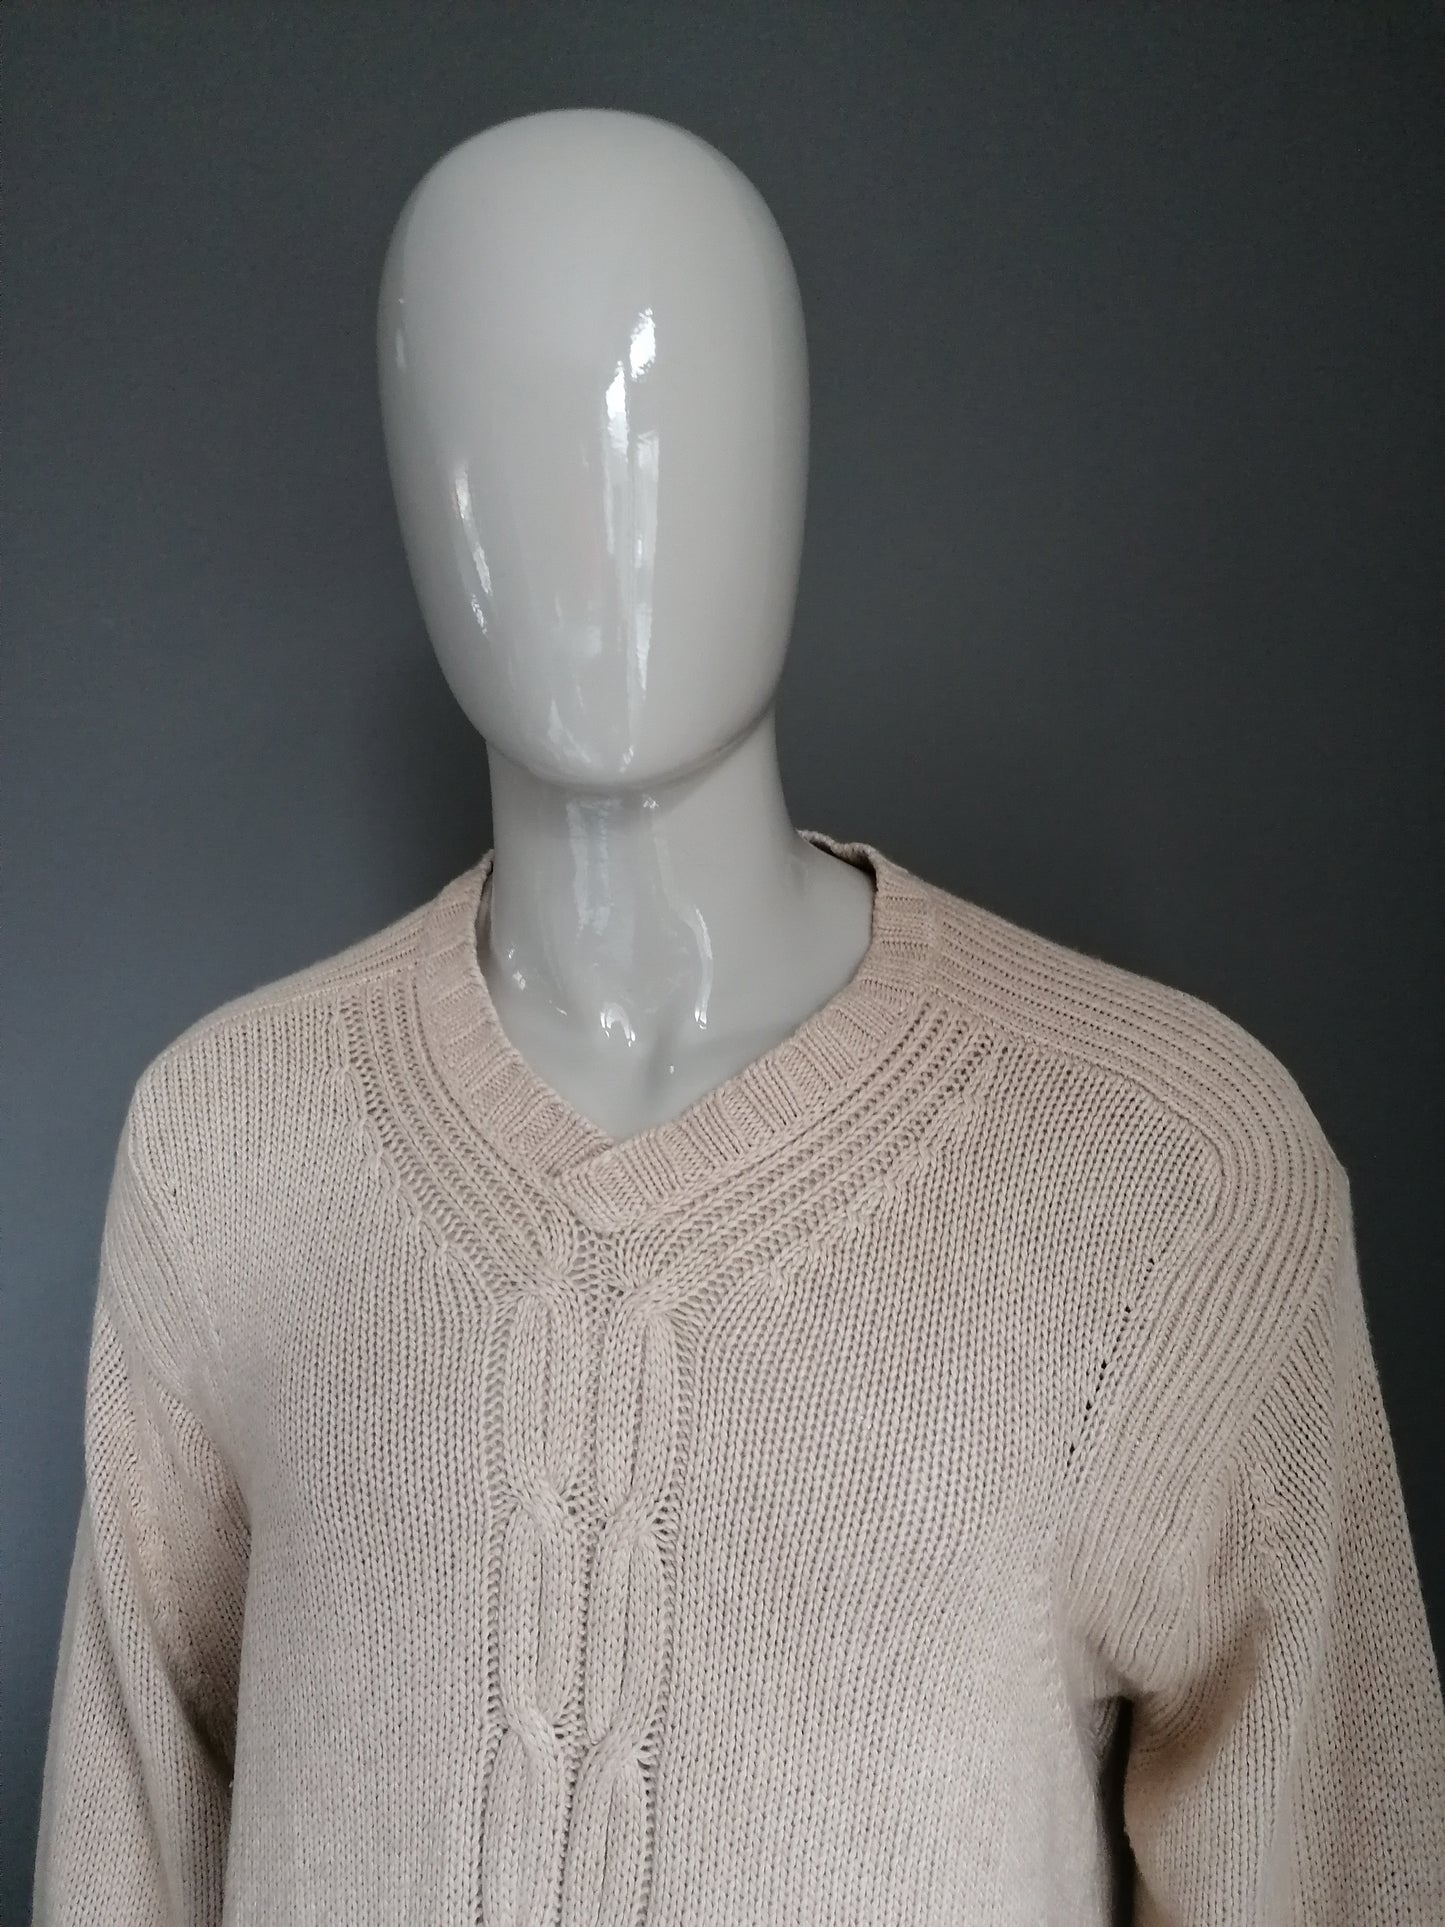 Tommy Hilfiger cable jersey with V-neck. Light brown colored. Size XXL / 2XL.